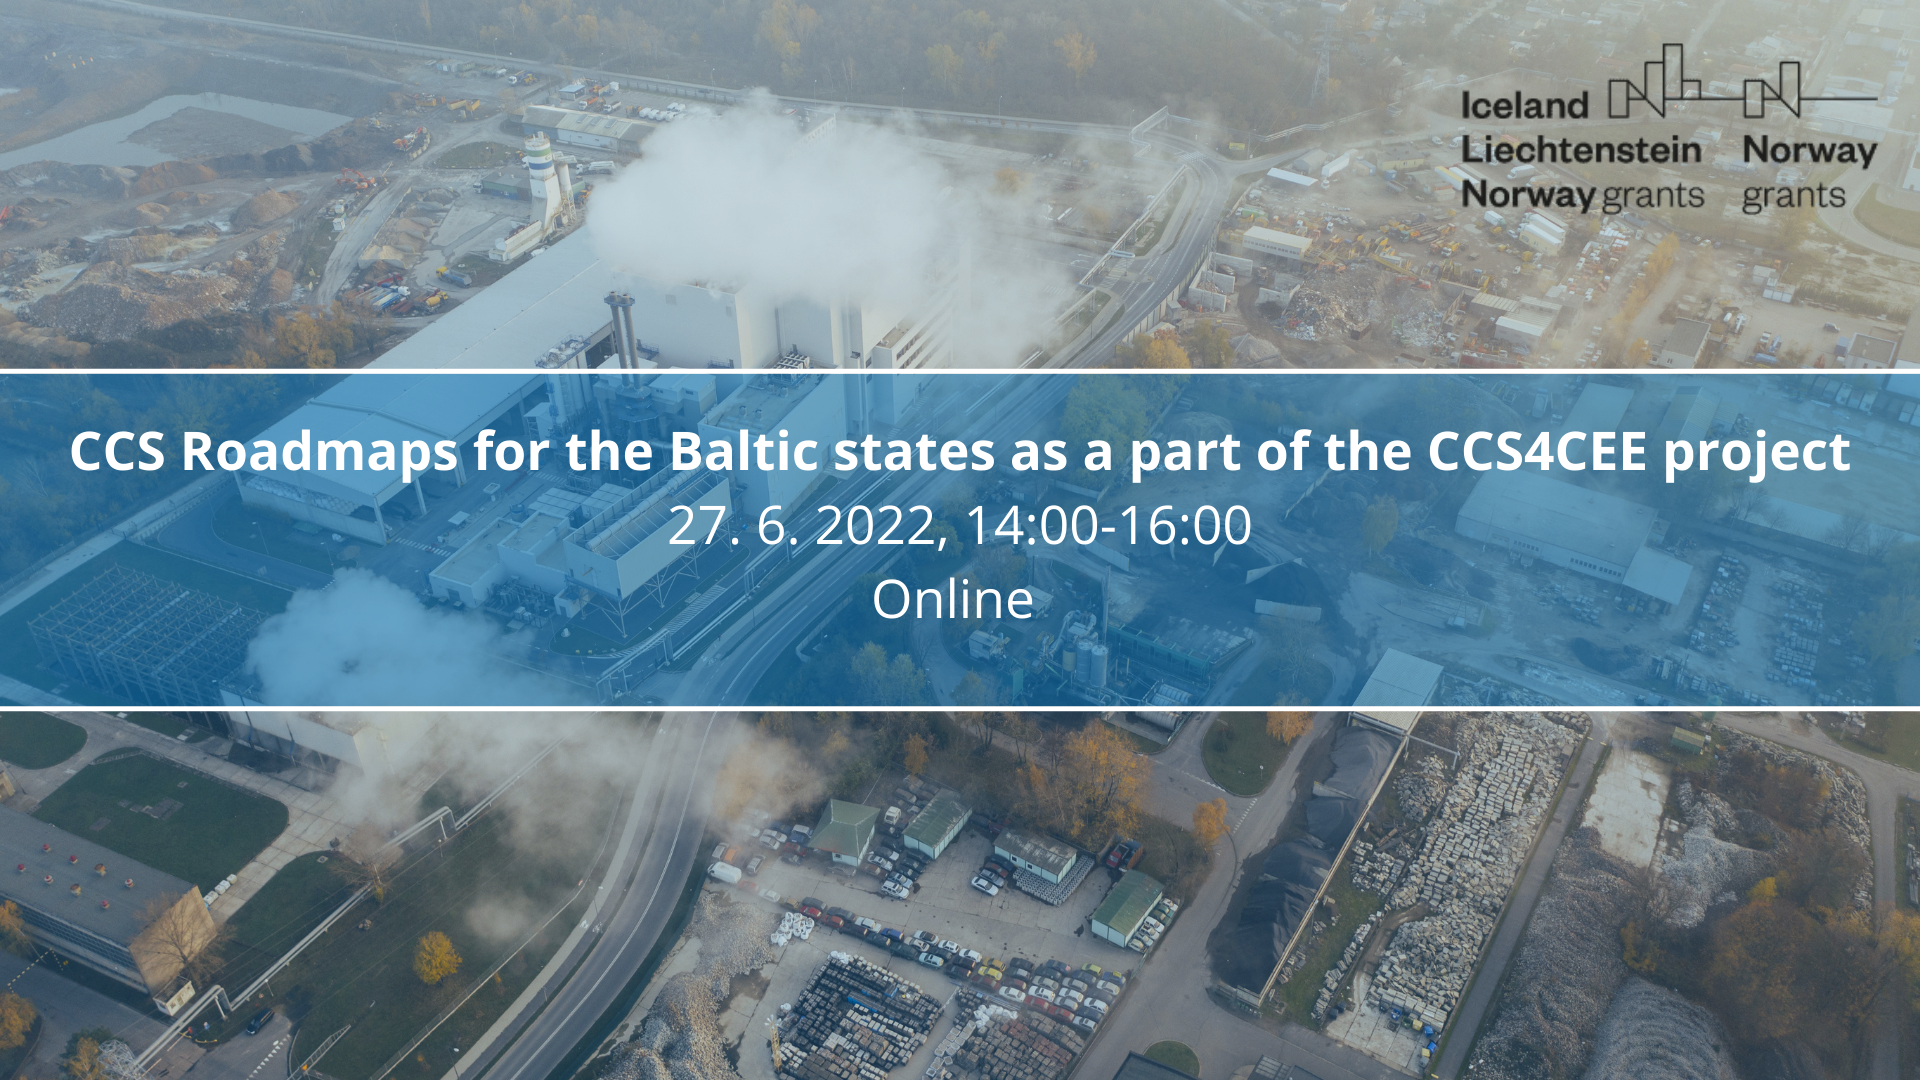 CCS Roadmaps for the Baltic states as a part of the CCS4CEE project